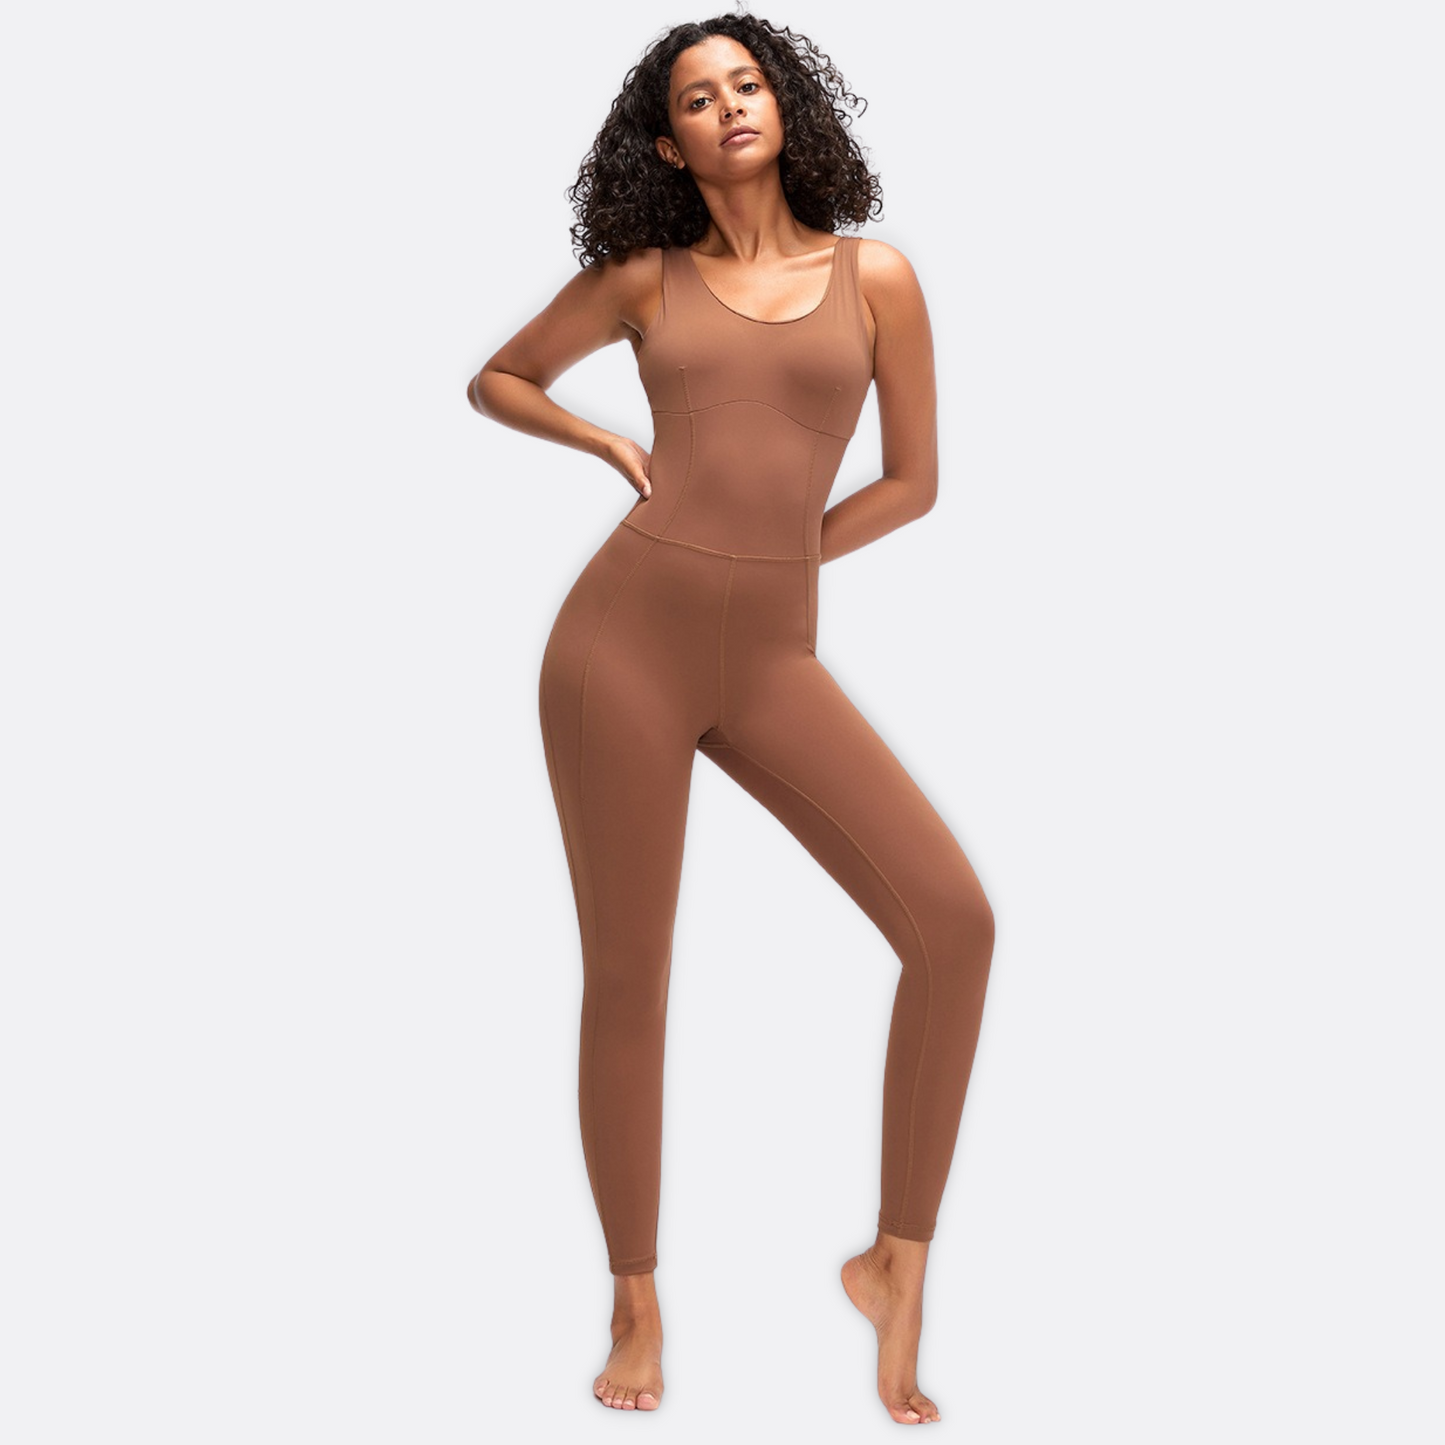 Fitness model in a sexy, brown jumpsuit/ bodsyuit from Vibras Activewear